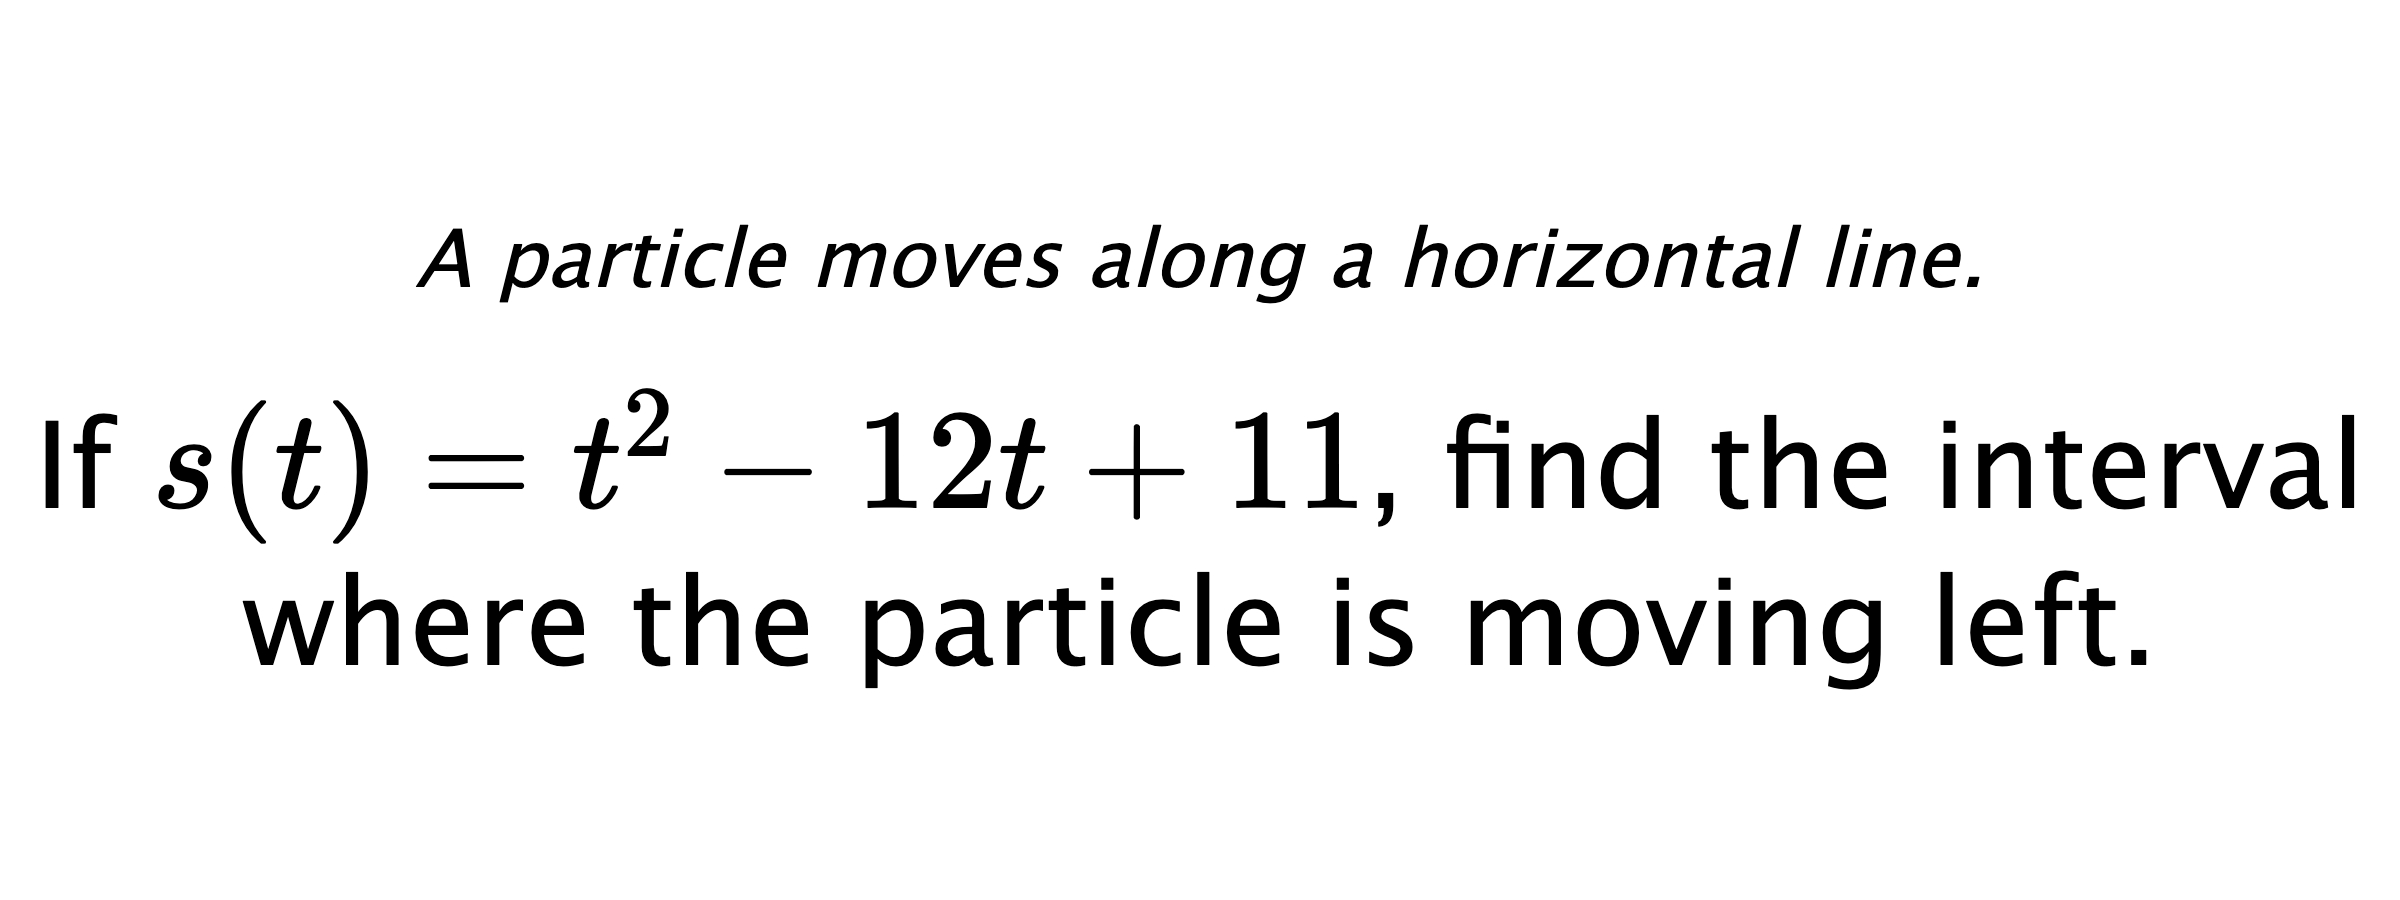 A particle moves along a horizontal line. If $ s(t)=t^2-12t+11 $, find the interval where the particle is moving left.